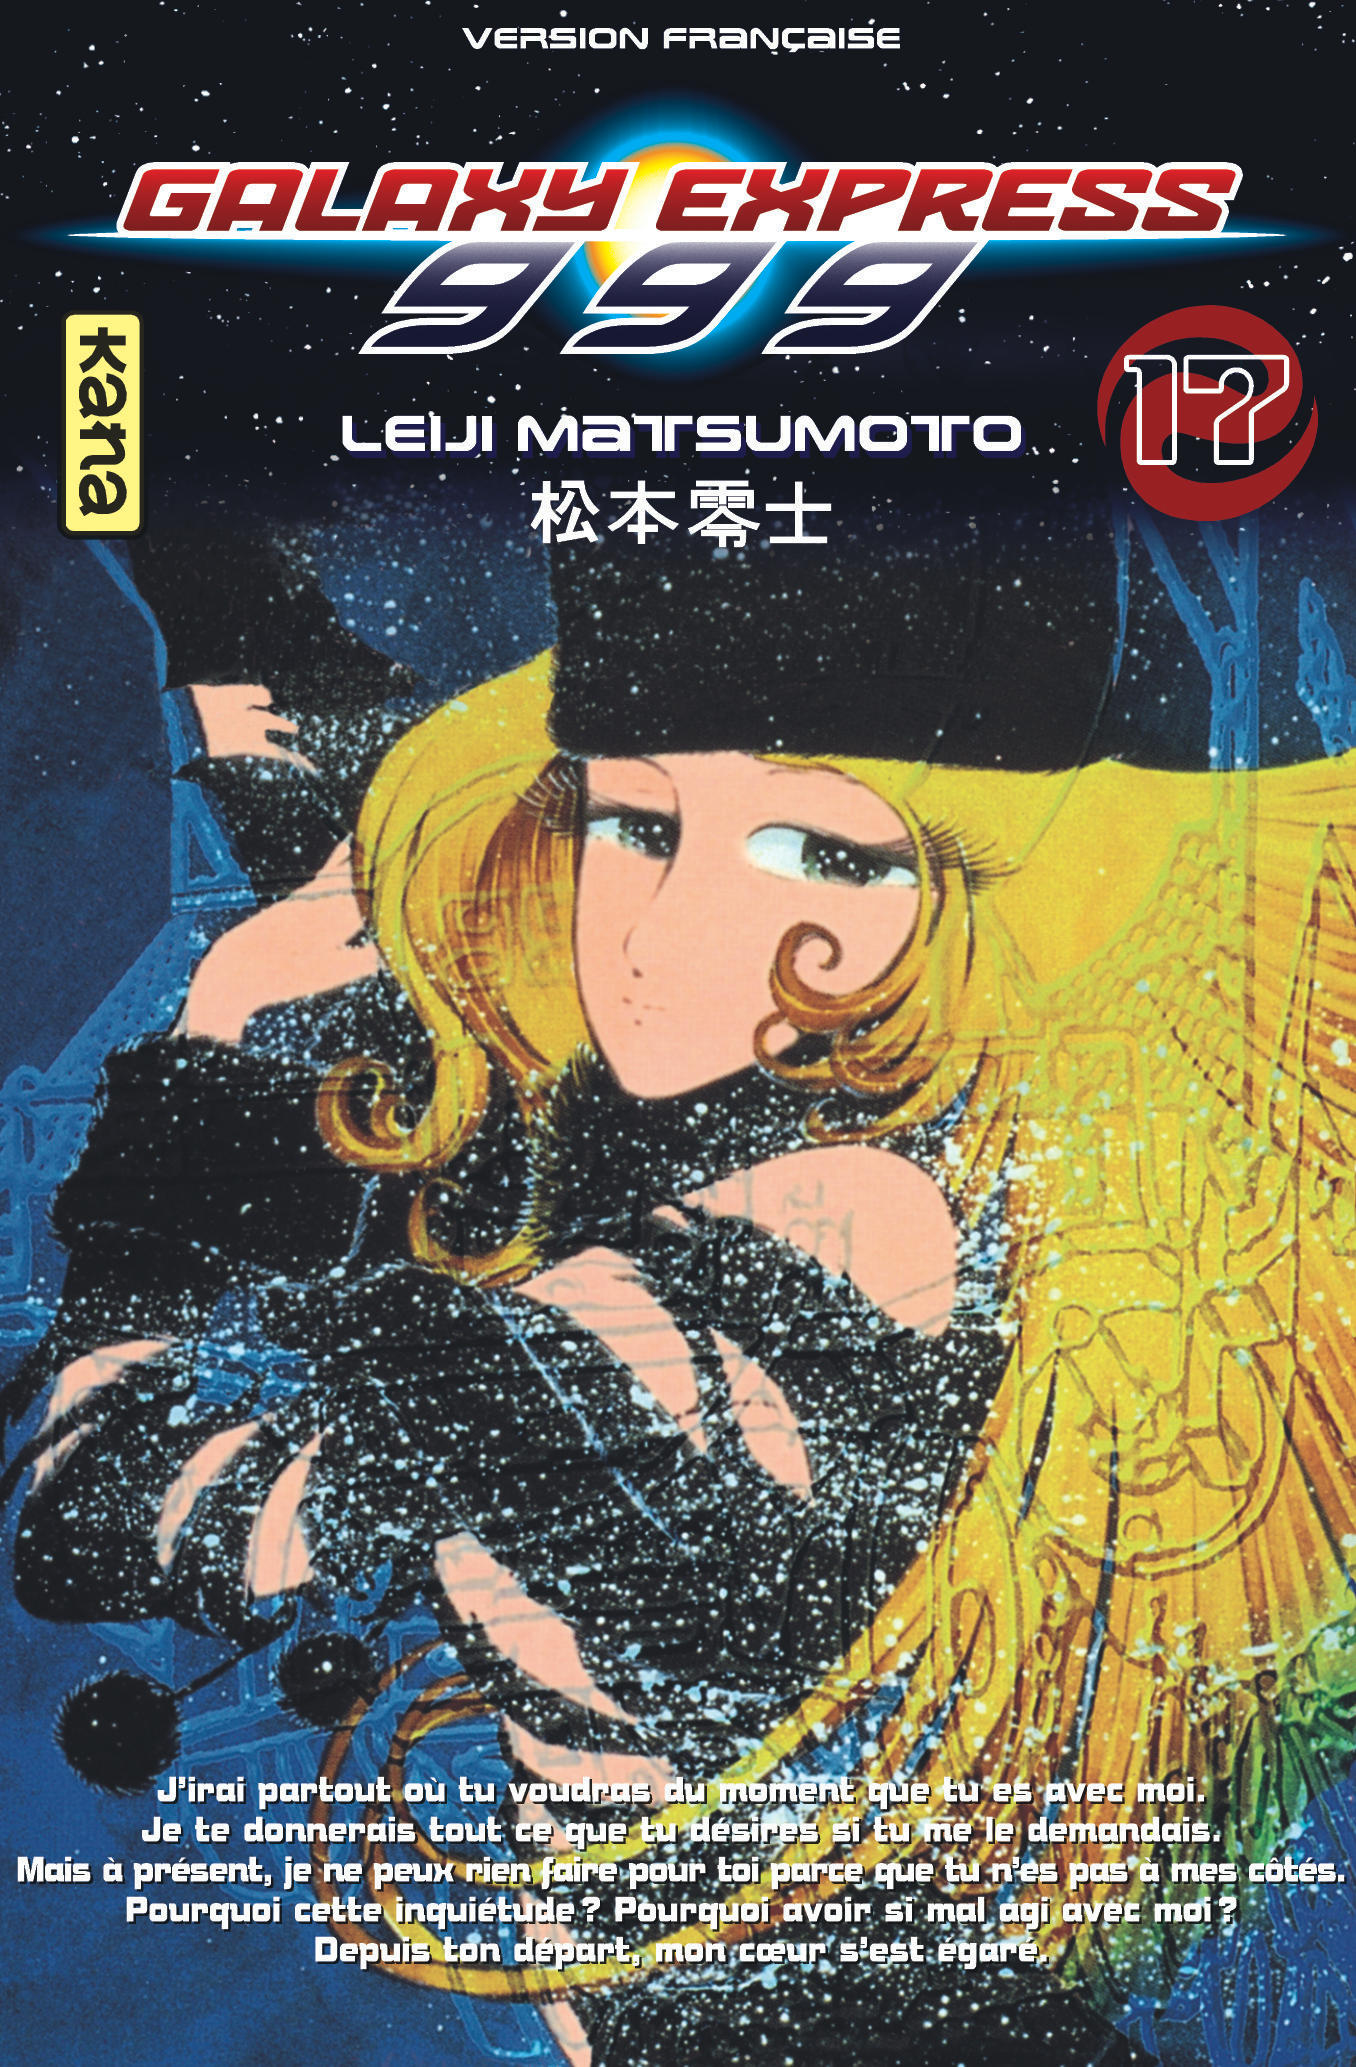 Galaxy Express 999 – Tome 17 - couv